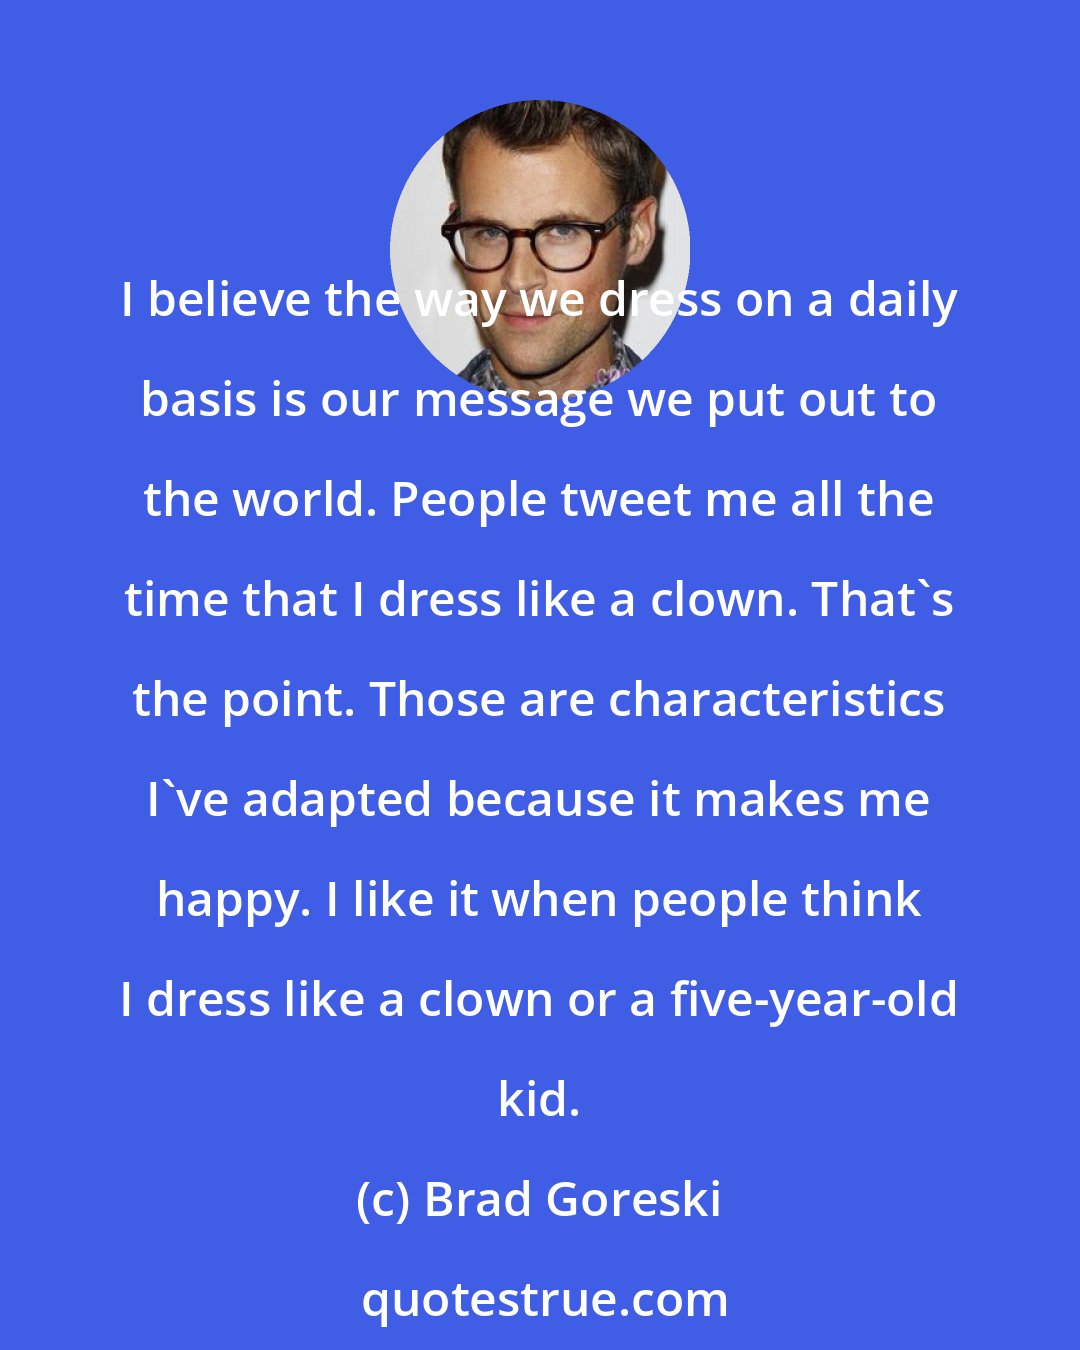 Brad Goreski: I believe the way we dress on a daily basis is our message we put out to the world. People tweet me all the time that I dress like a clown. That's the point. Those are characteristics I've adapted because it makes me happy. I like it when people think I dress like a clown or a five-year-old kid.